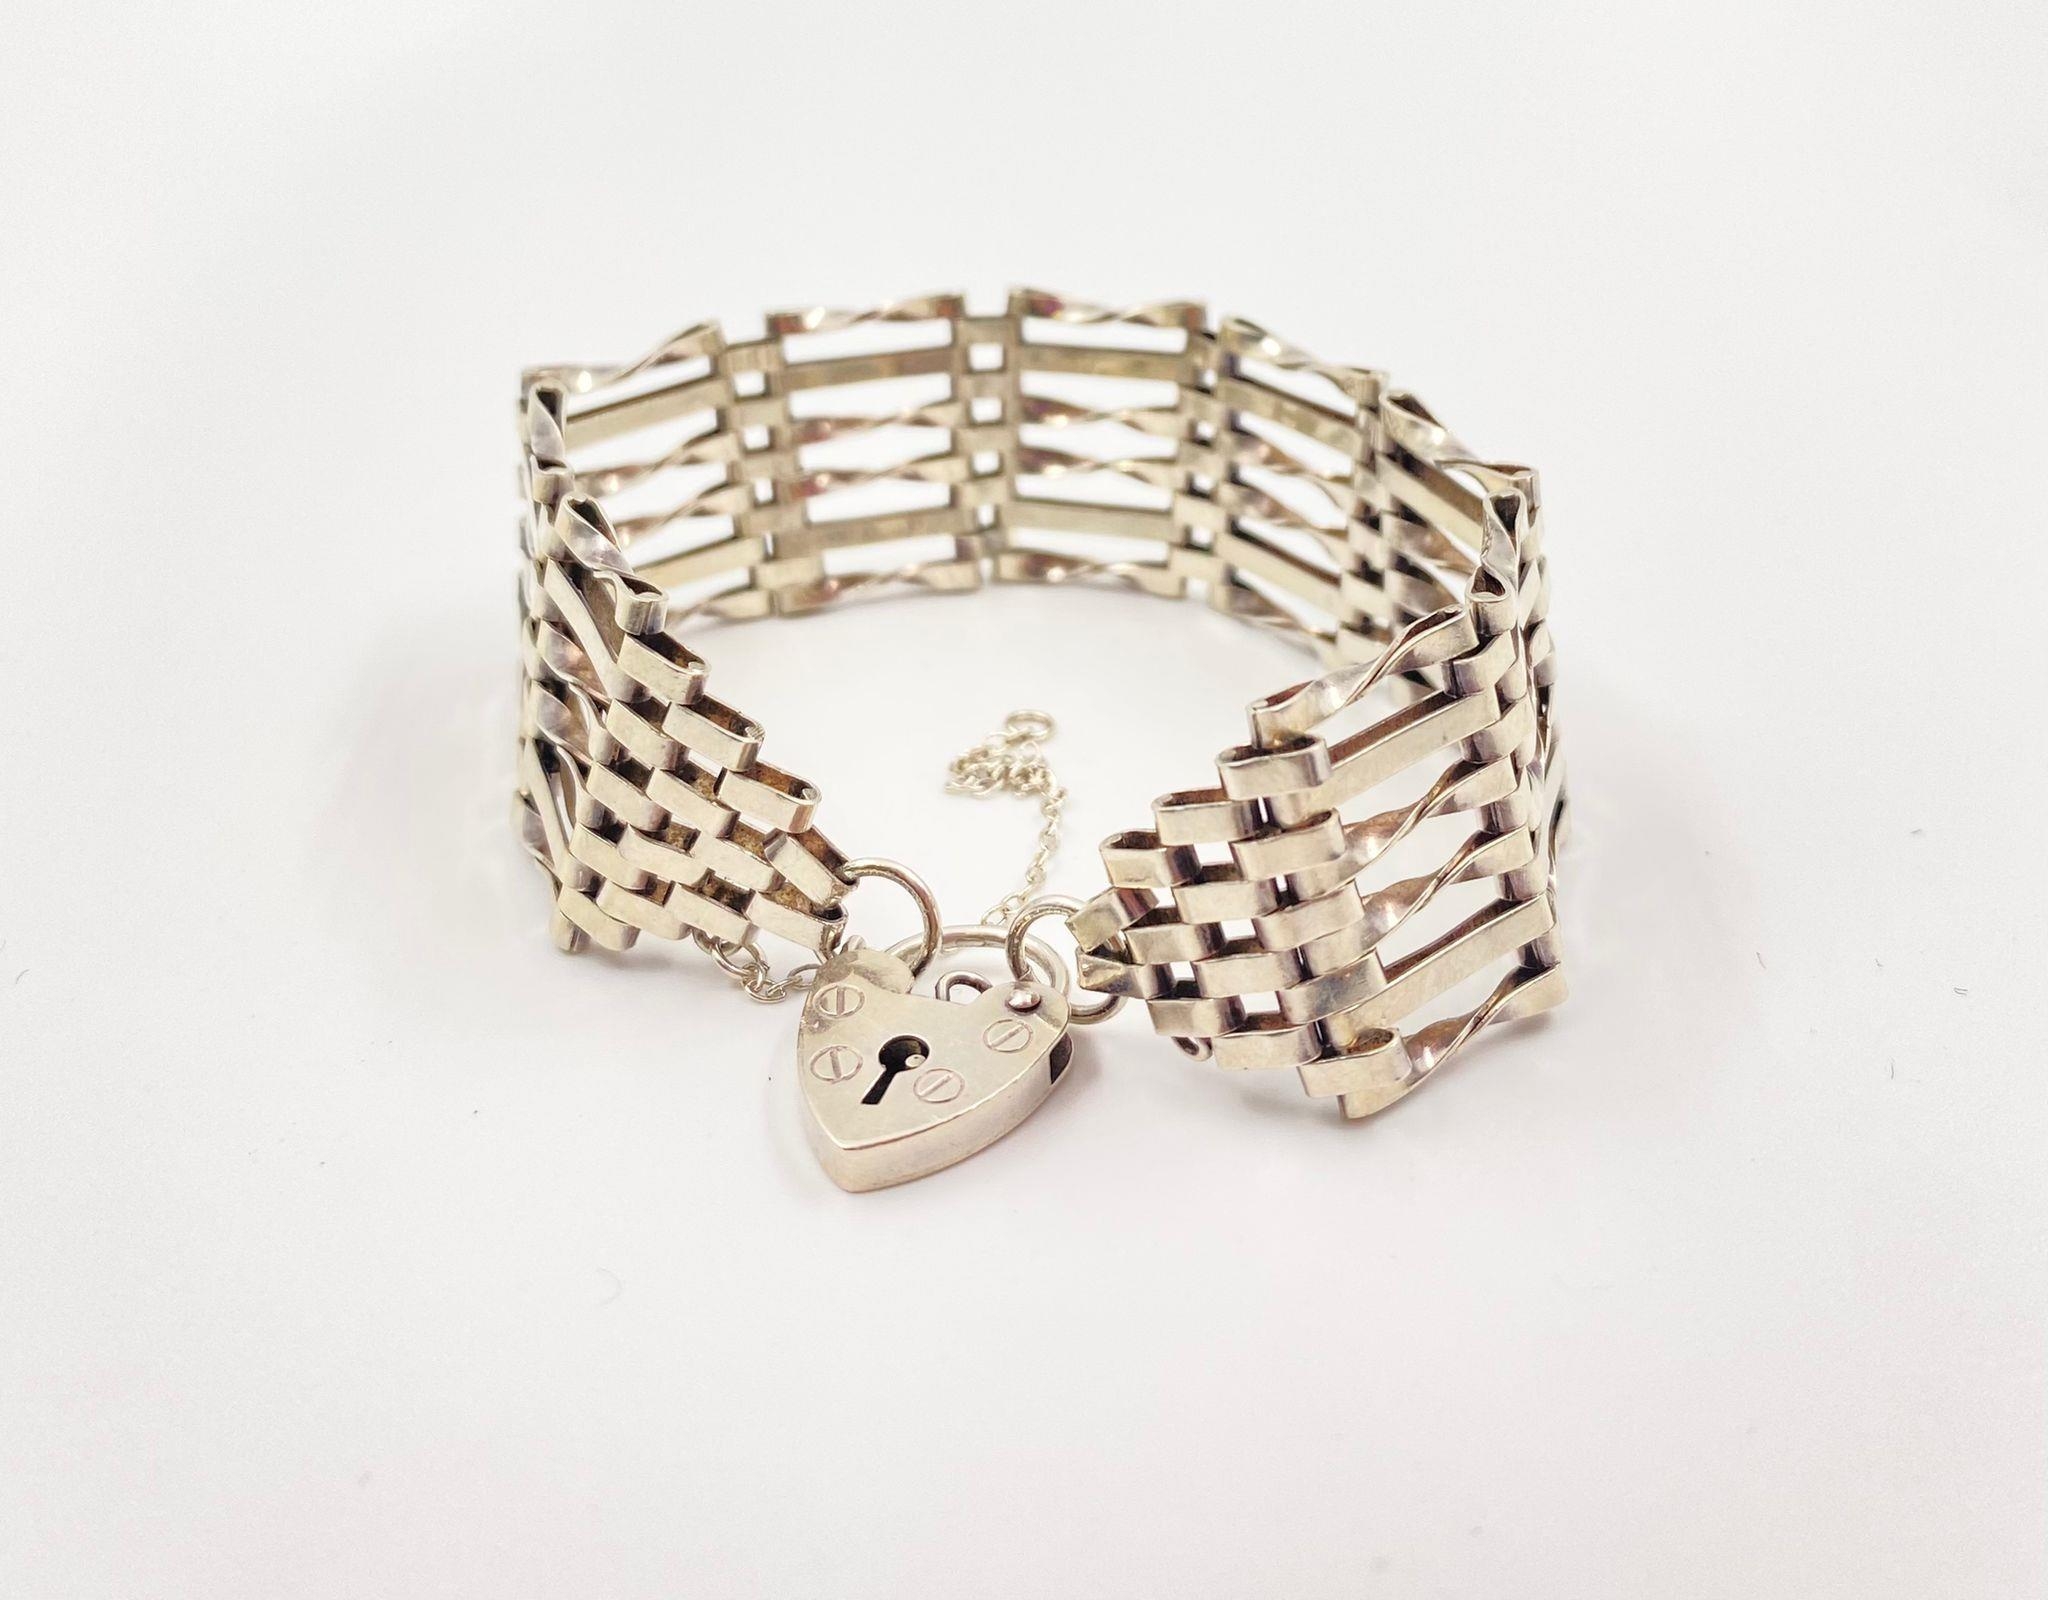 A Silver Ladder-Link Bracelet with Heart Charm Clasp. 16cm. 20g